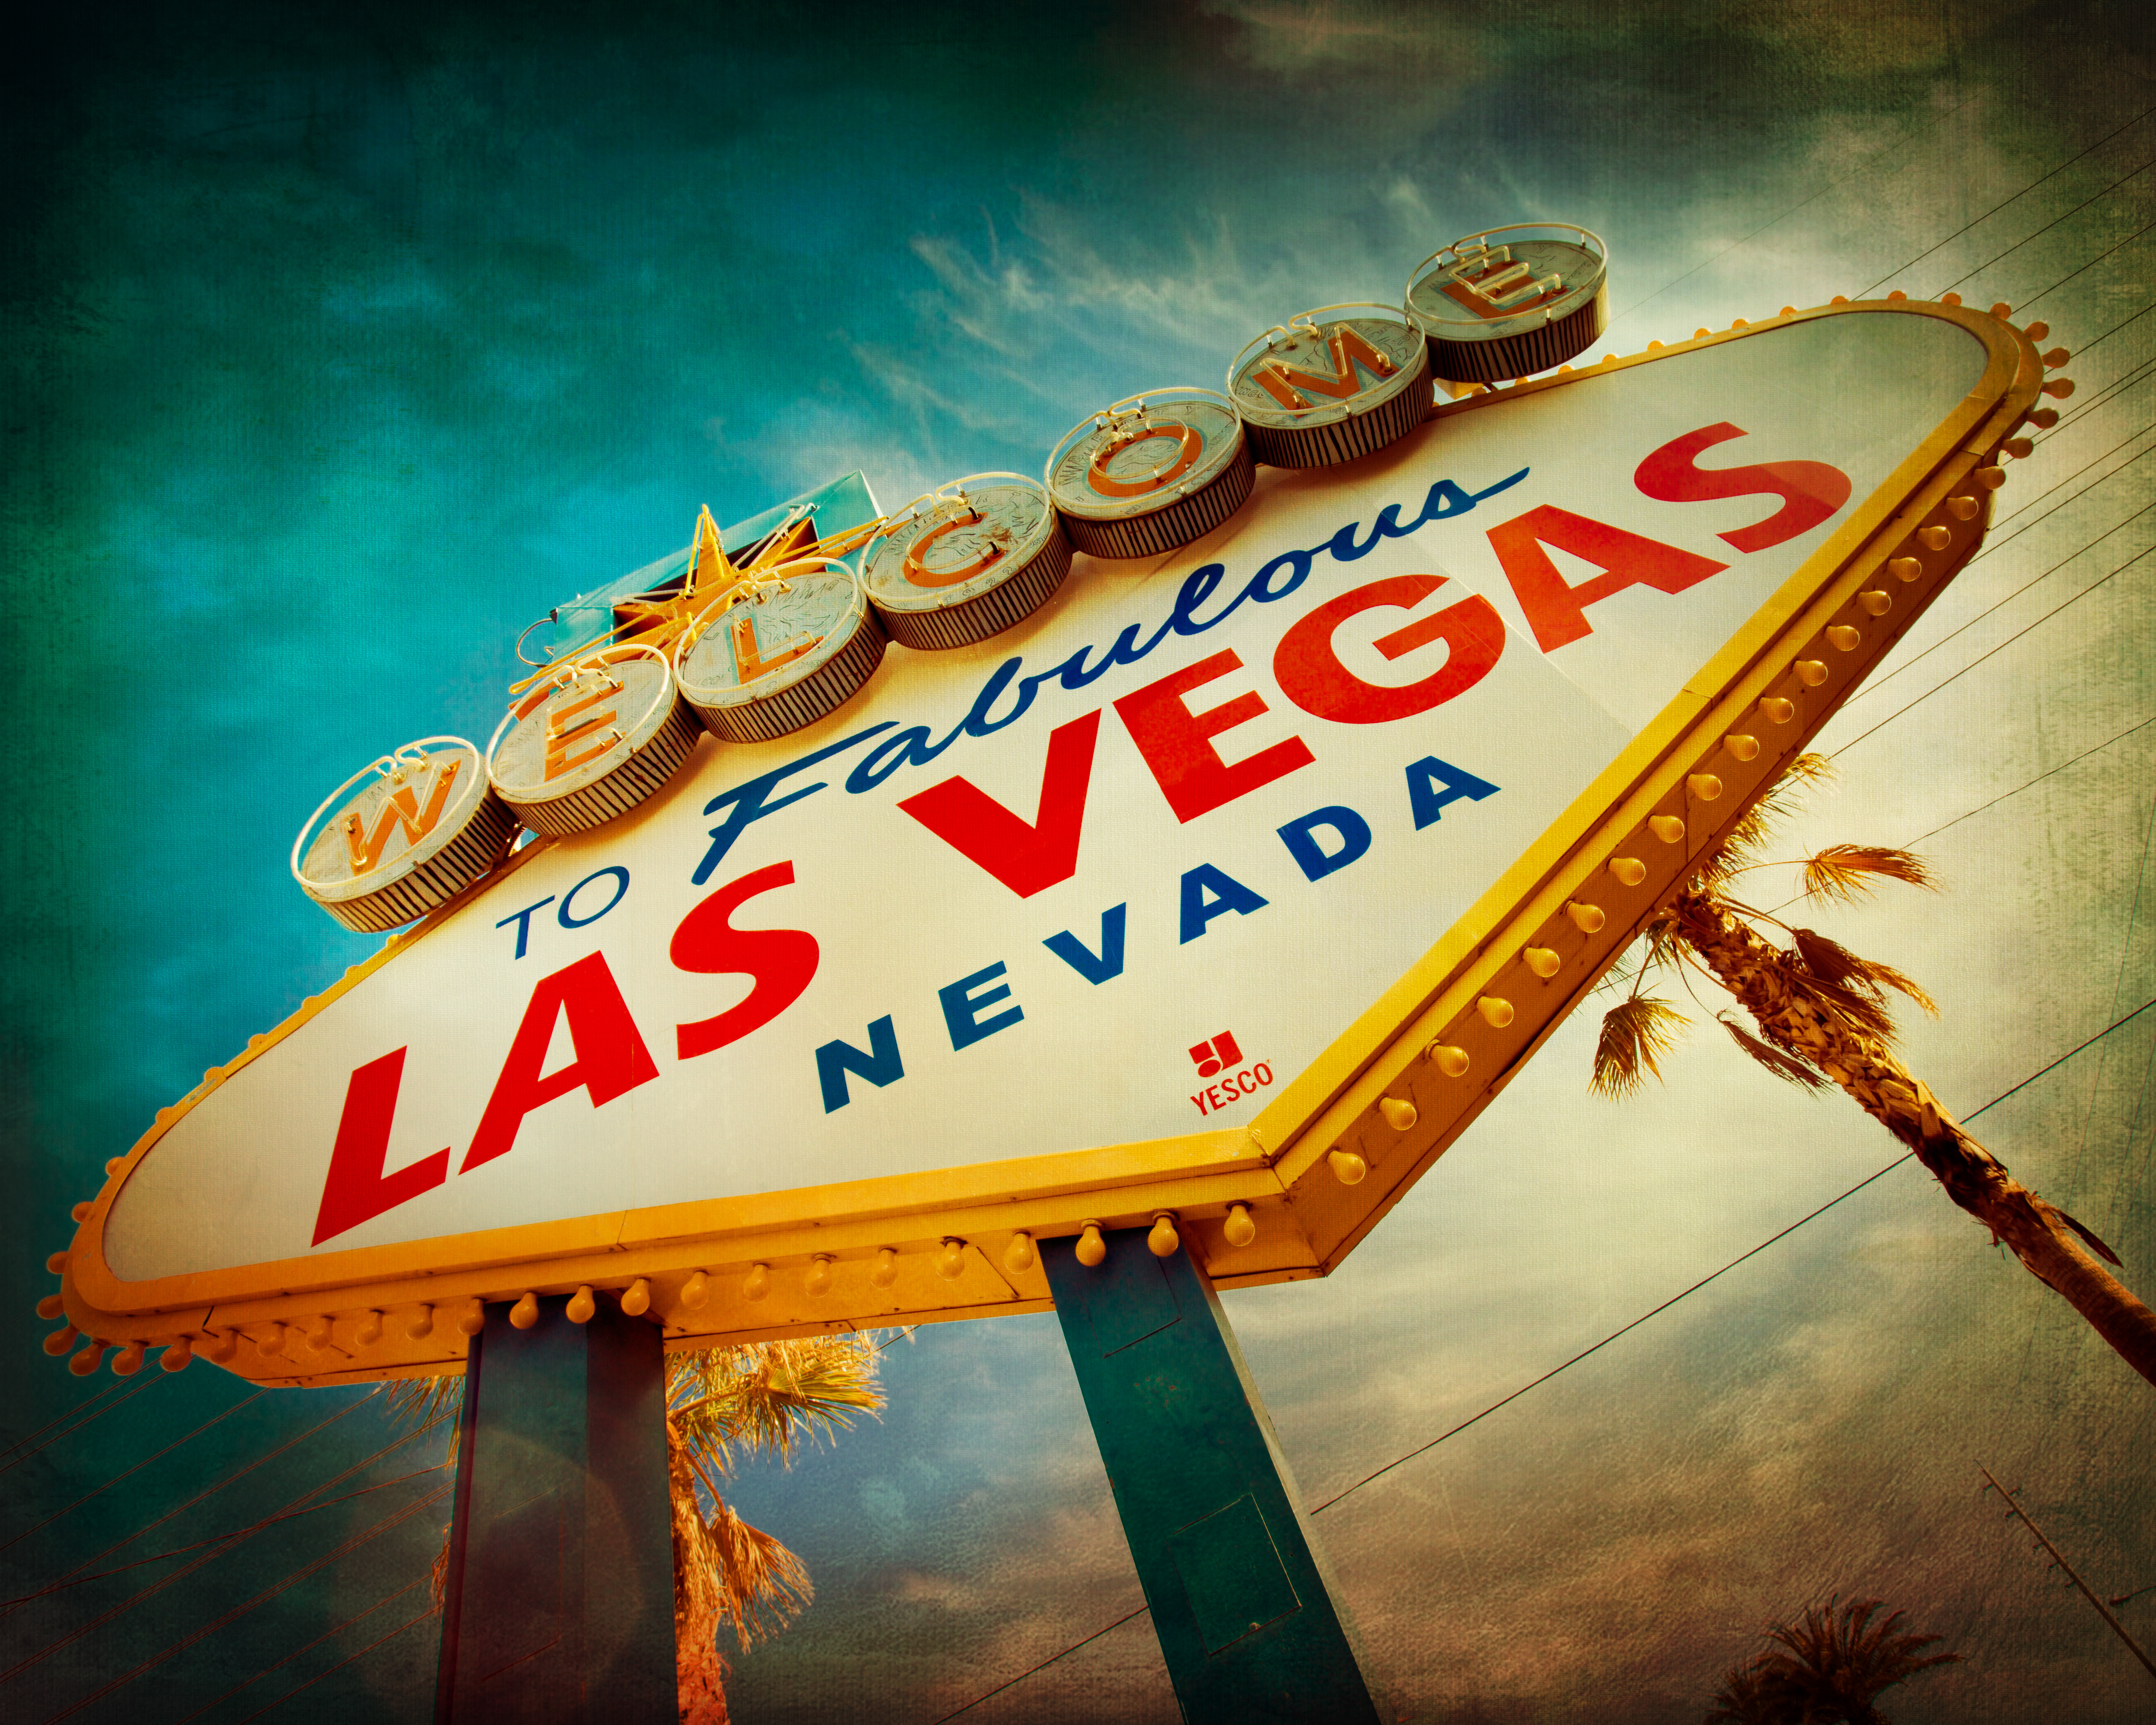 Famous Welcome to Las Vegas sign with vintage texture